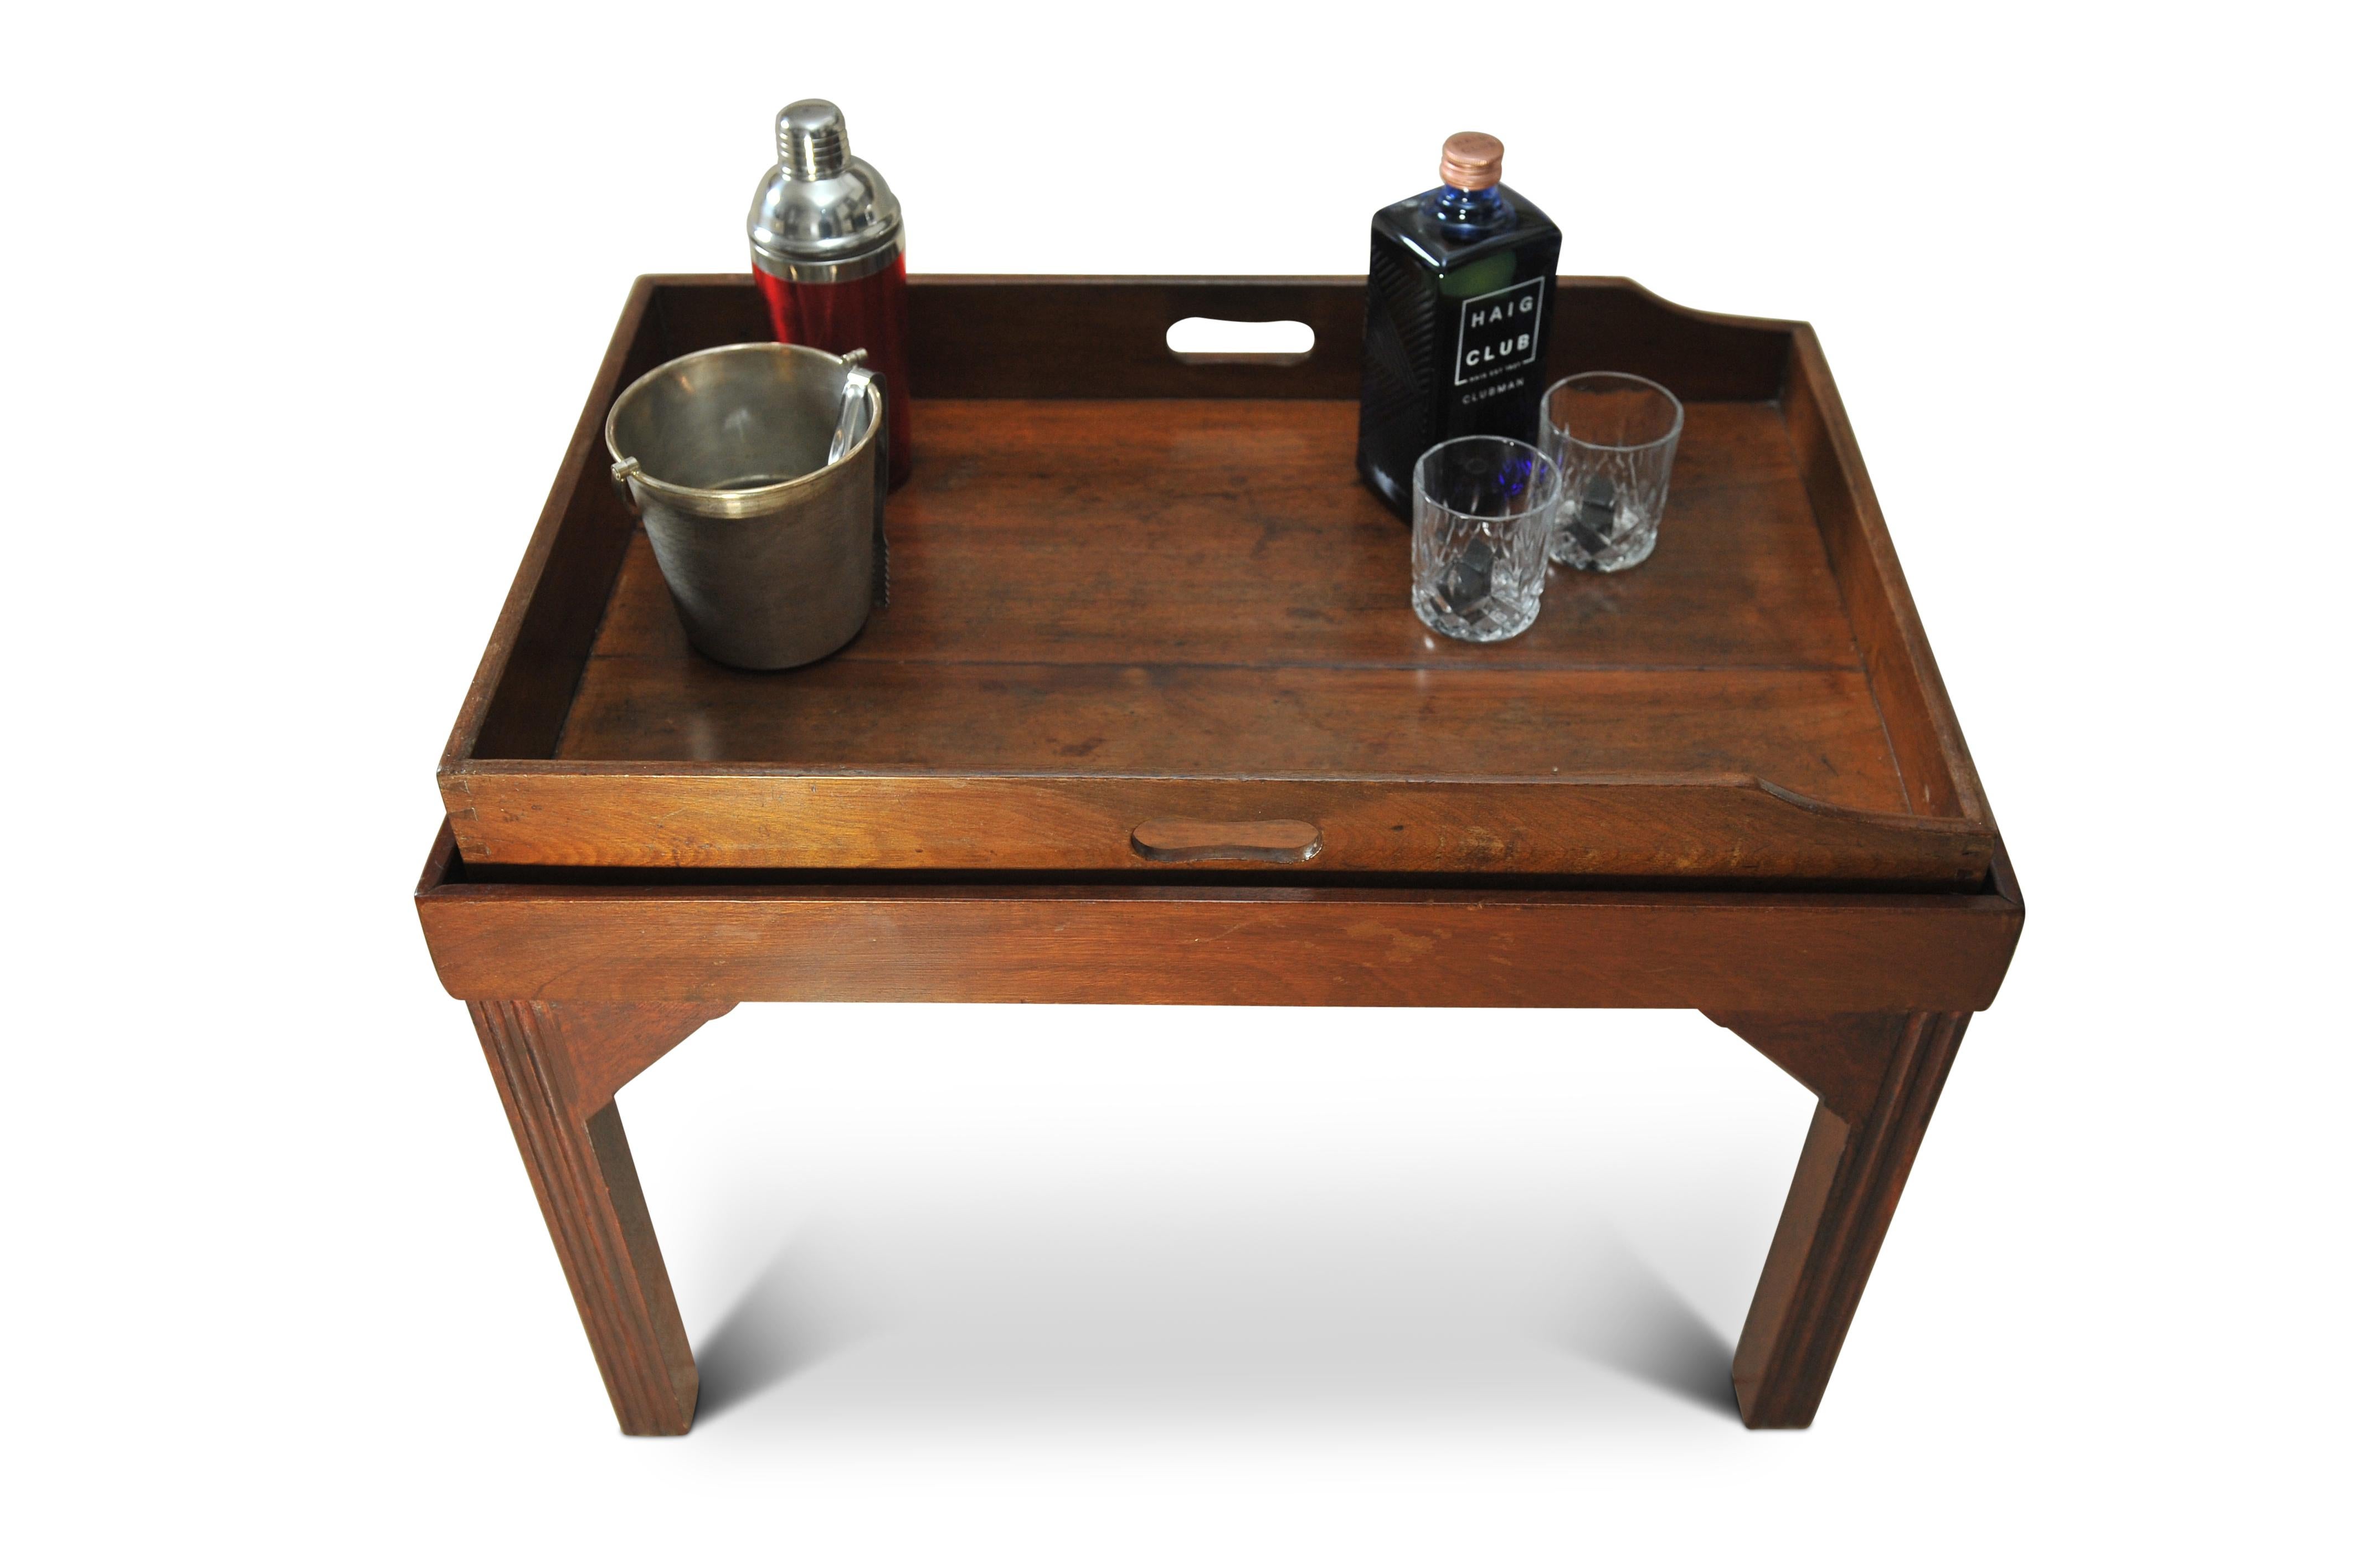 A Victorian Mahogany Butler's Tray With A Later Fixed Coffee Table Stand  Terminating on Block Supports

Removable tray.

